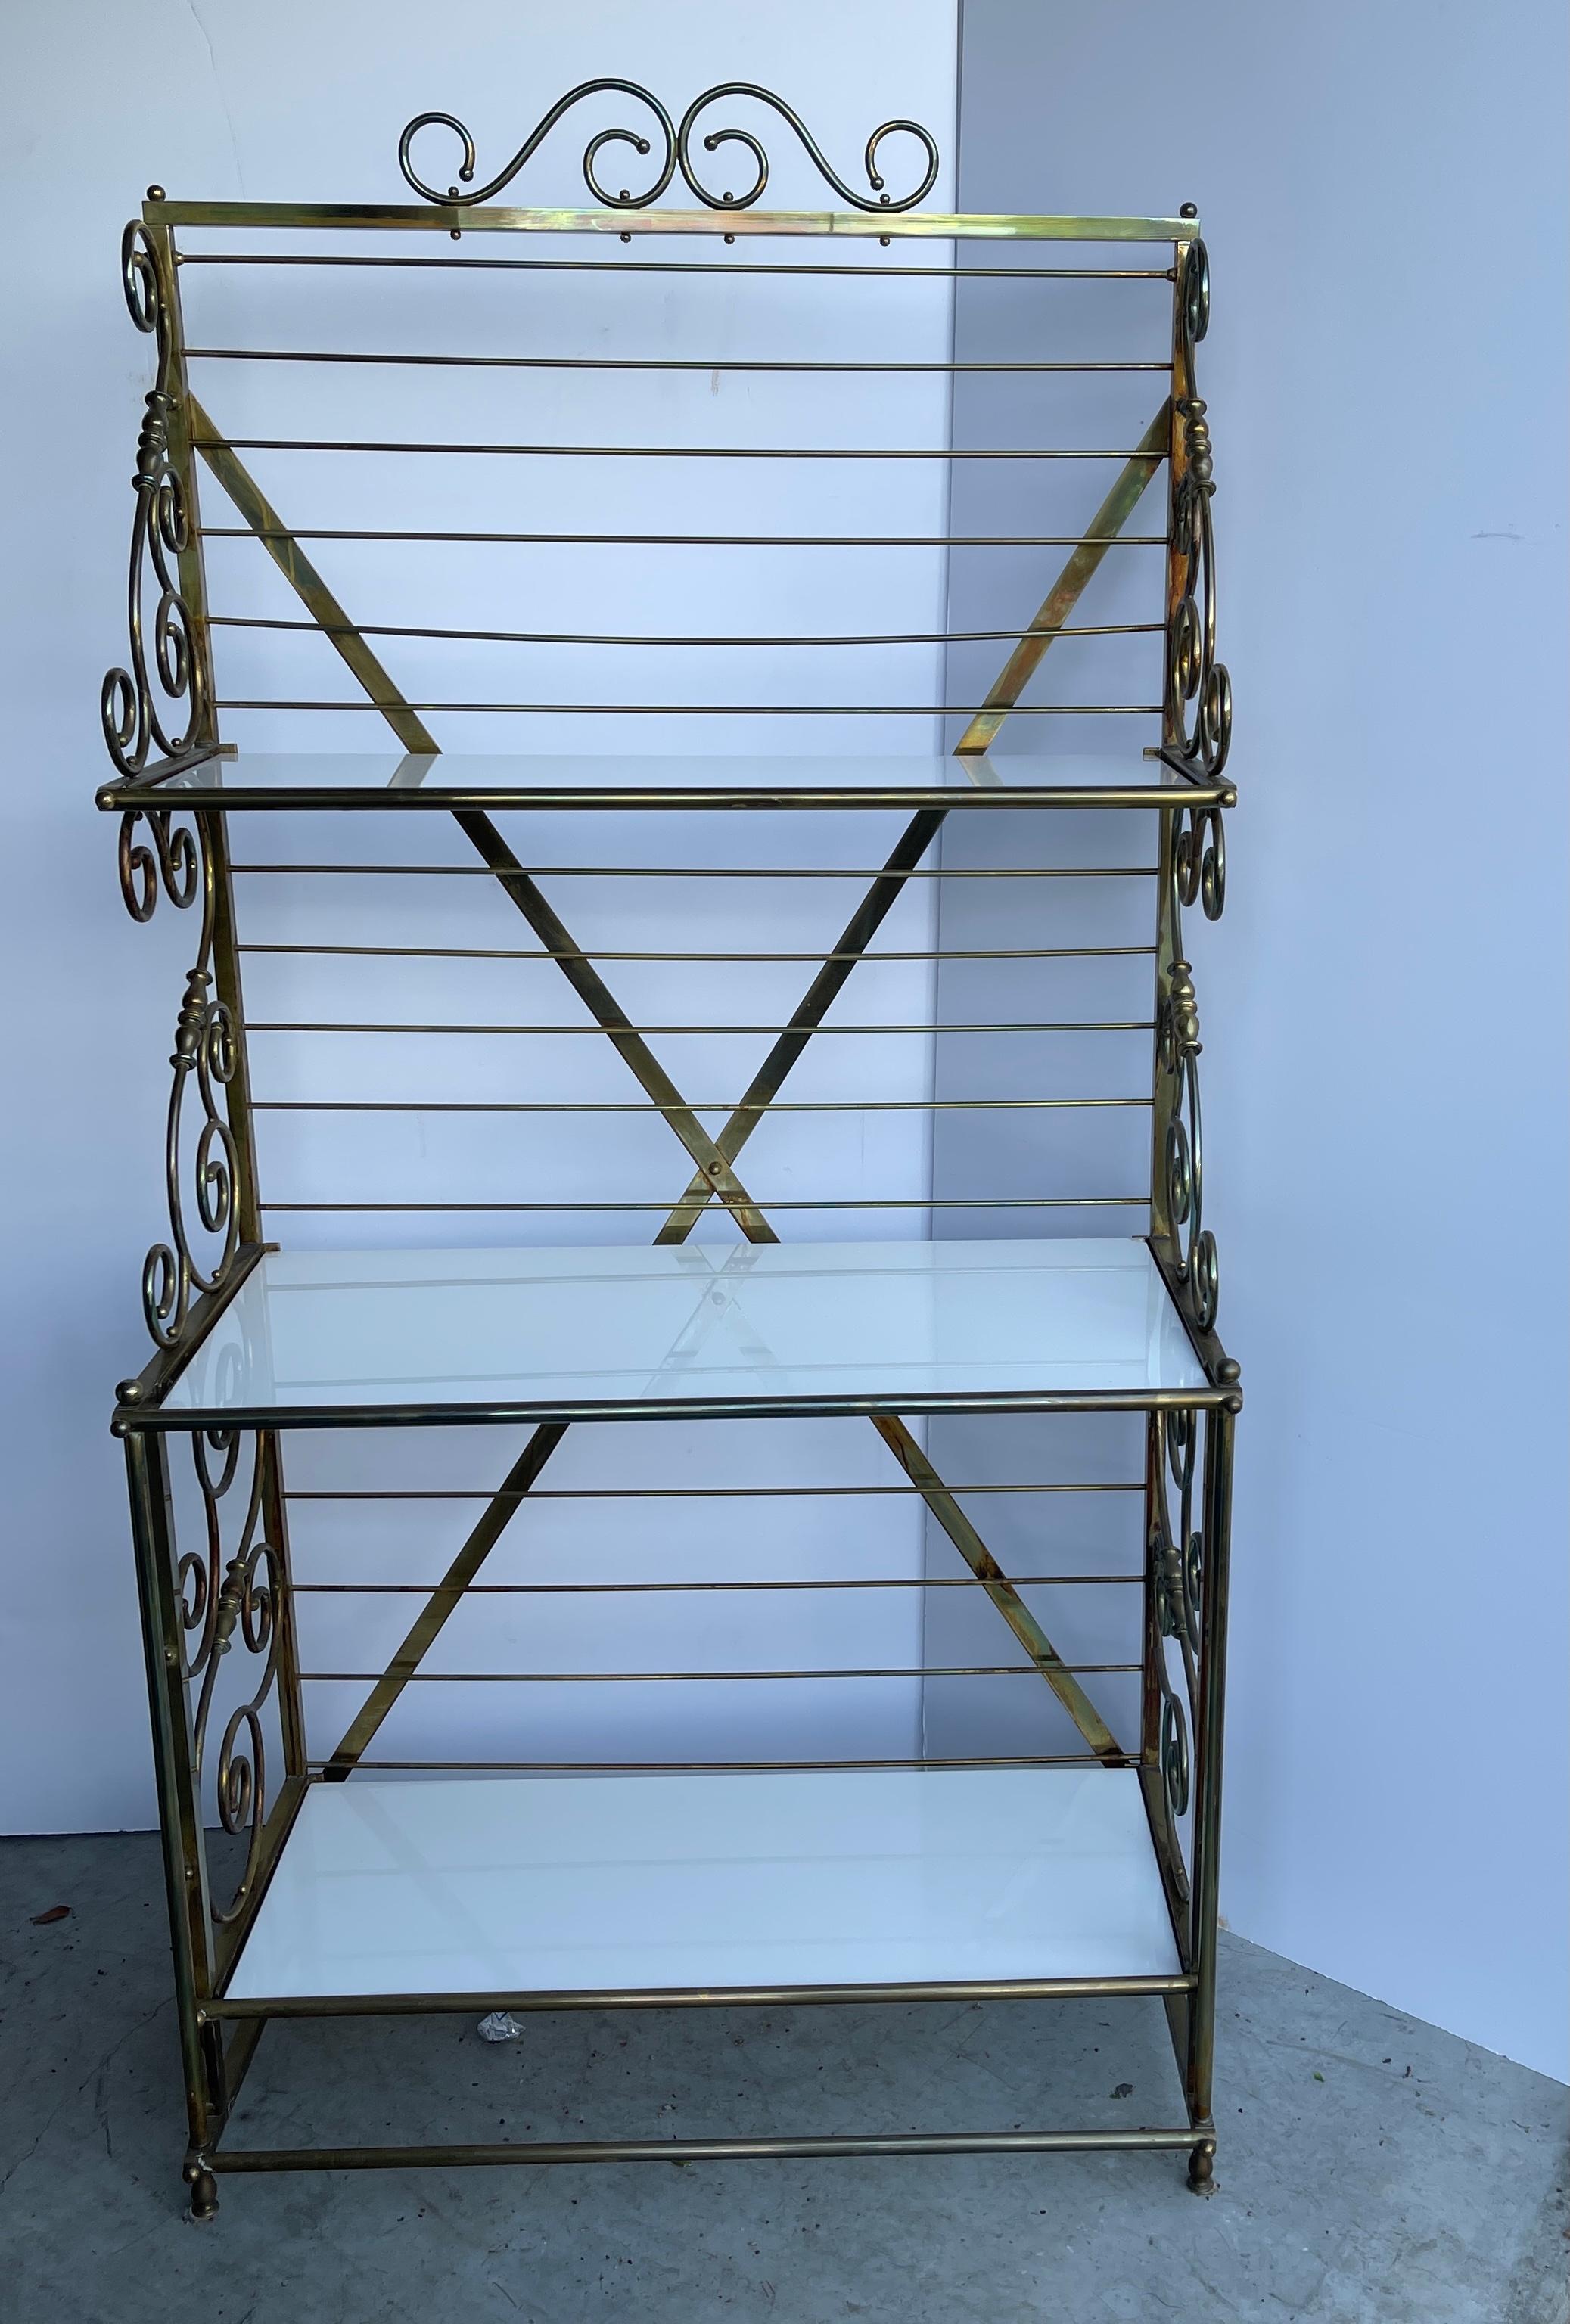 Vintage three-tier bakers rack in brass and thick white milk glass shelves.
This is a spectacularly stylish French brass baker’s rack with amazing patina.